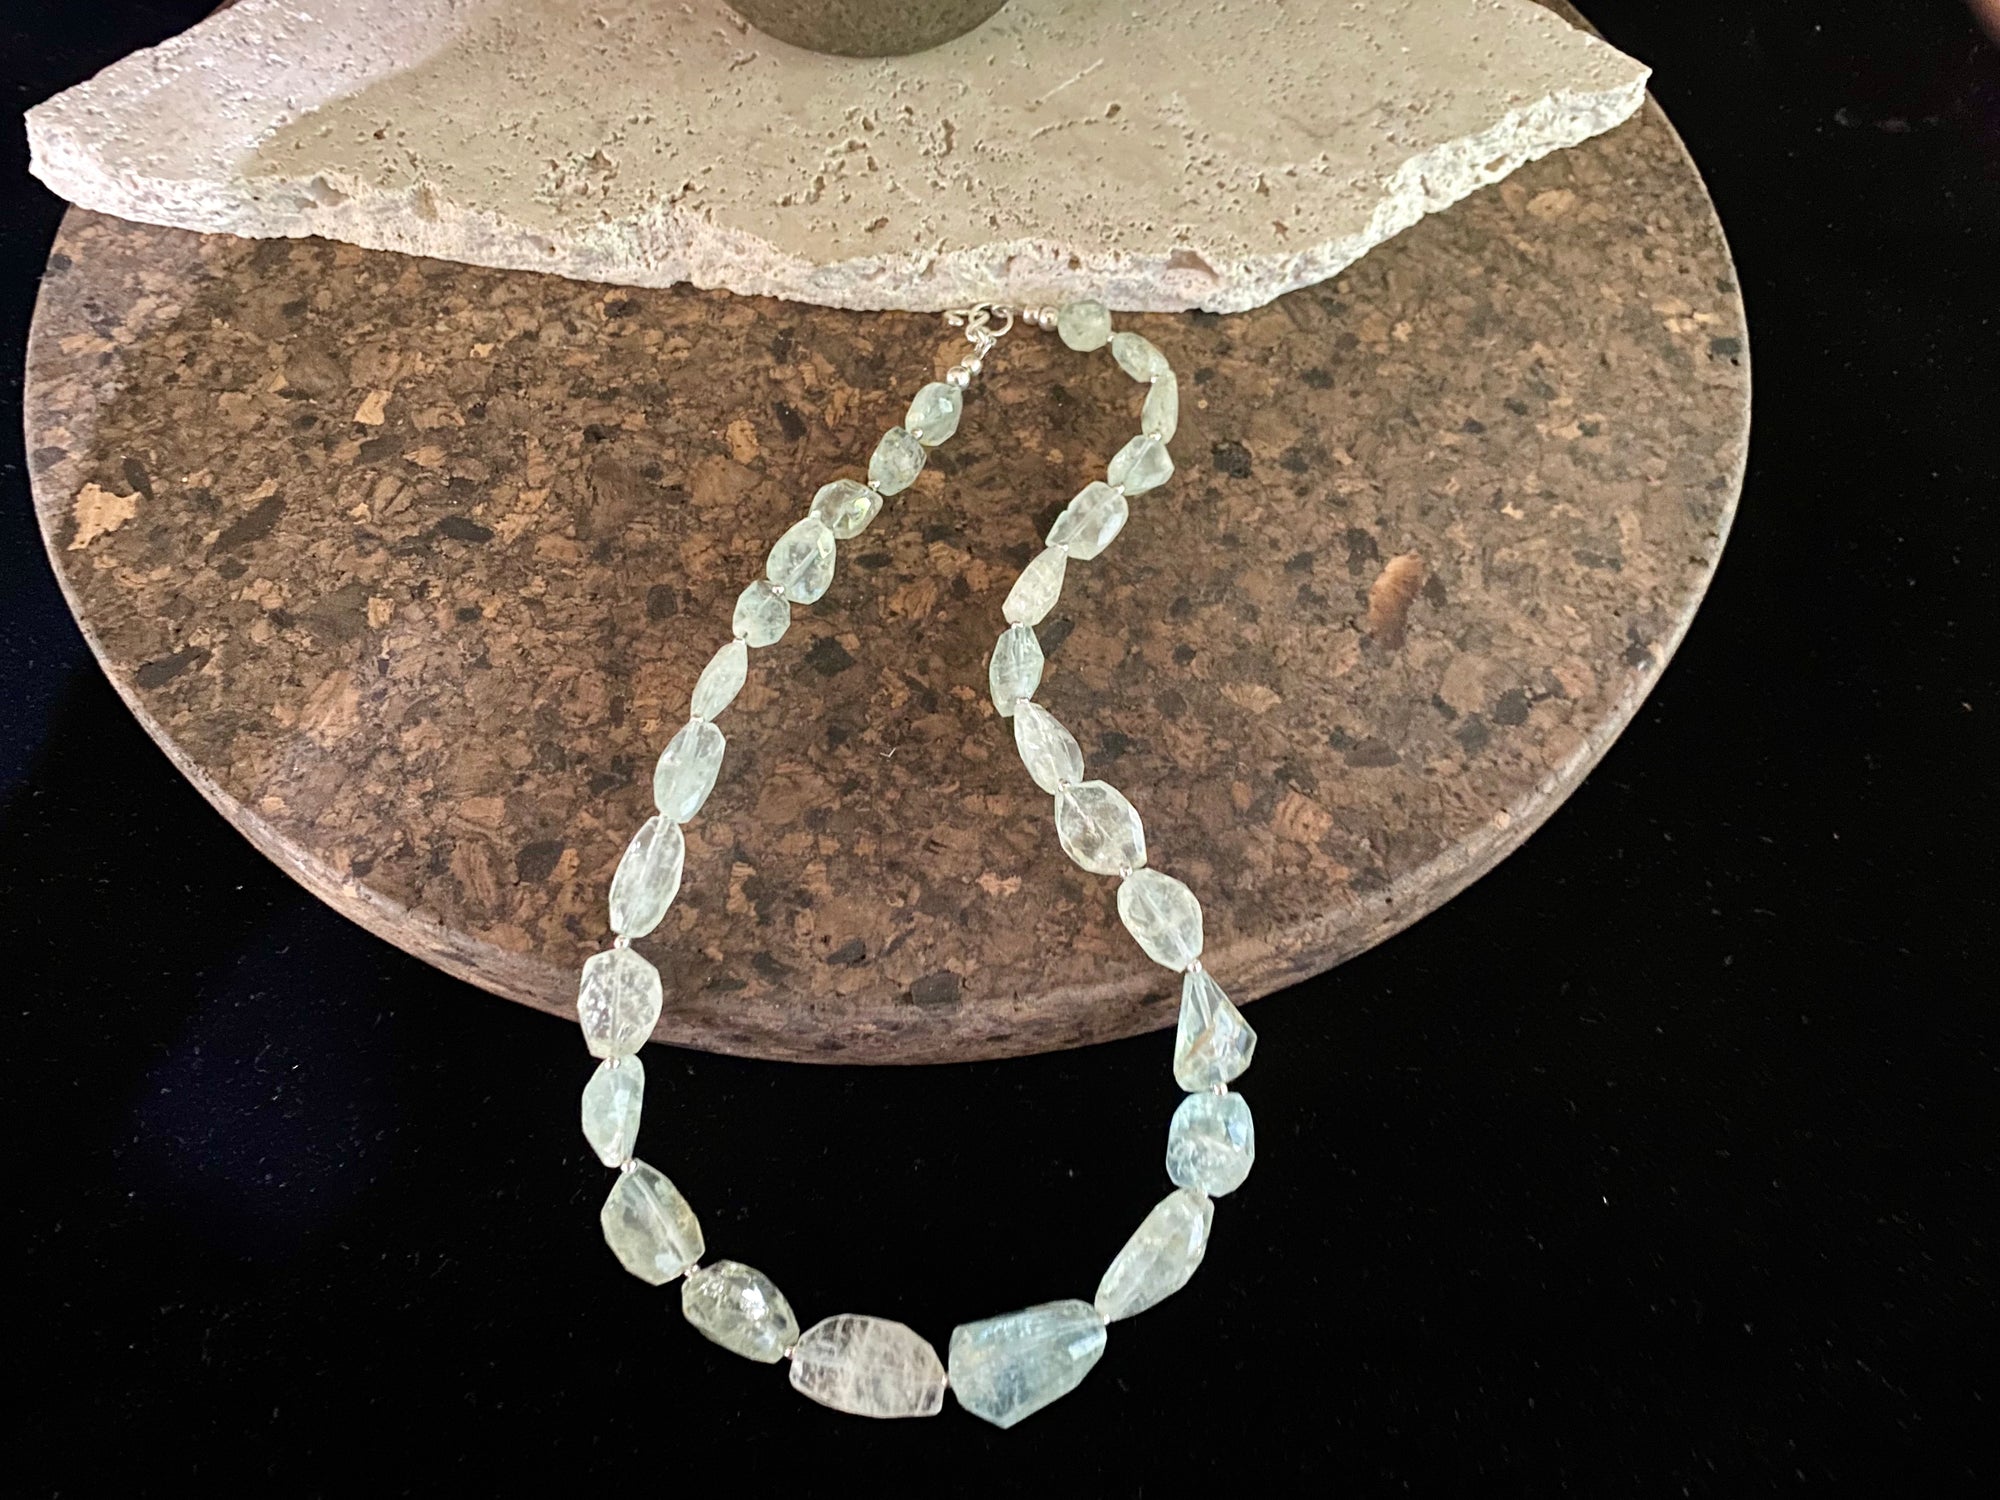 Natural pale blue aquamarine bead necklace featuring a magnificent centre bead and tiny silver bead detailing. Sterling silver findings. The aquamarine beads are matched, graduated, 100% natural and facet cut. They are a very light blue with a colour that changes depending on the angle viewed. 44.5 cm length